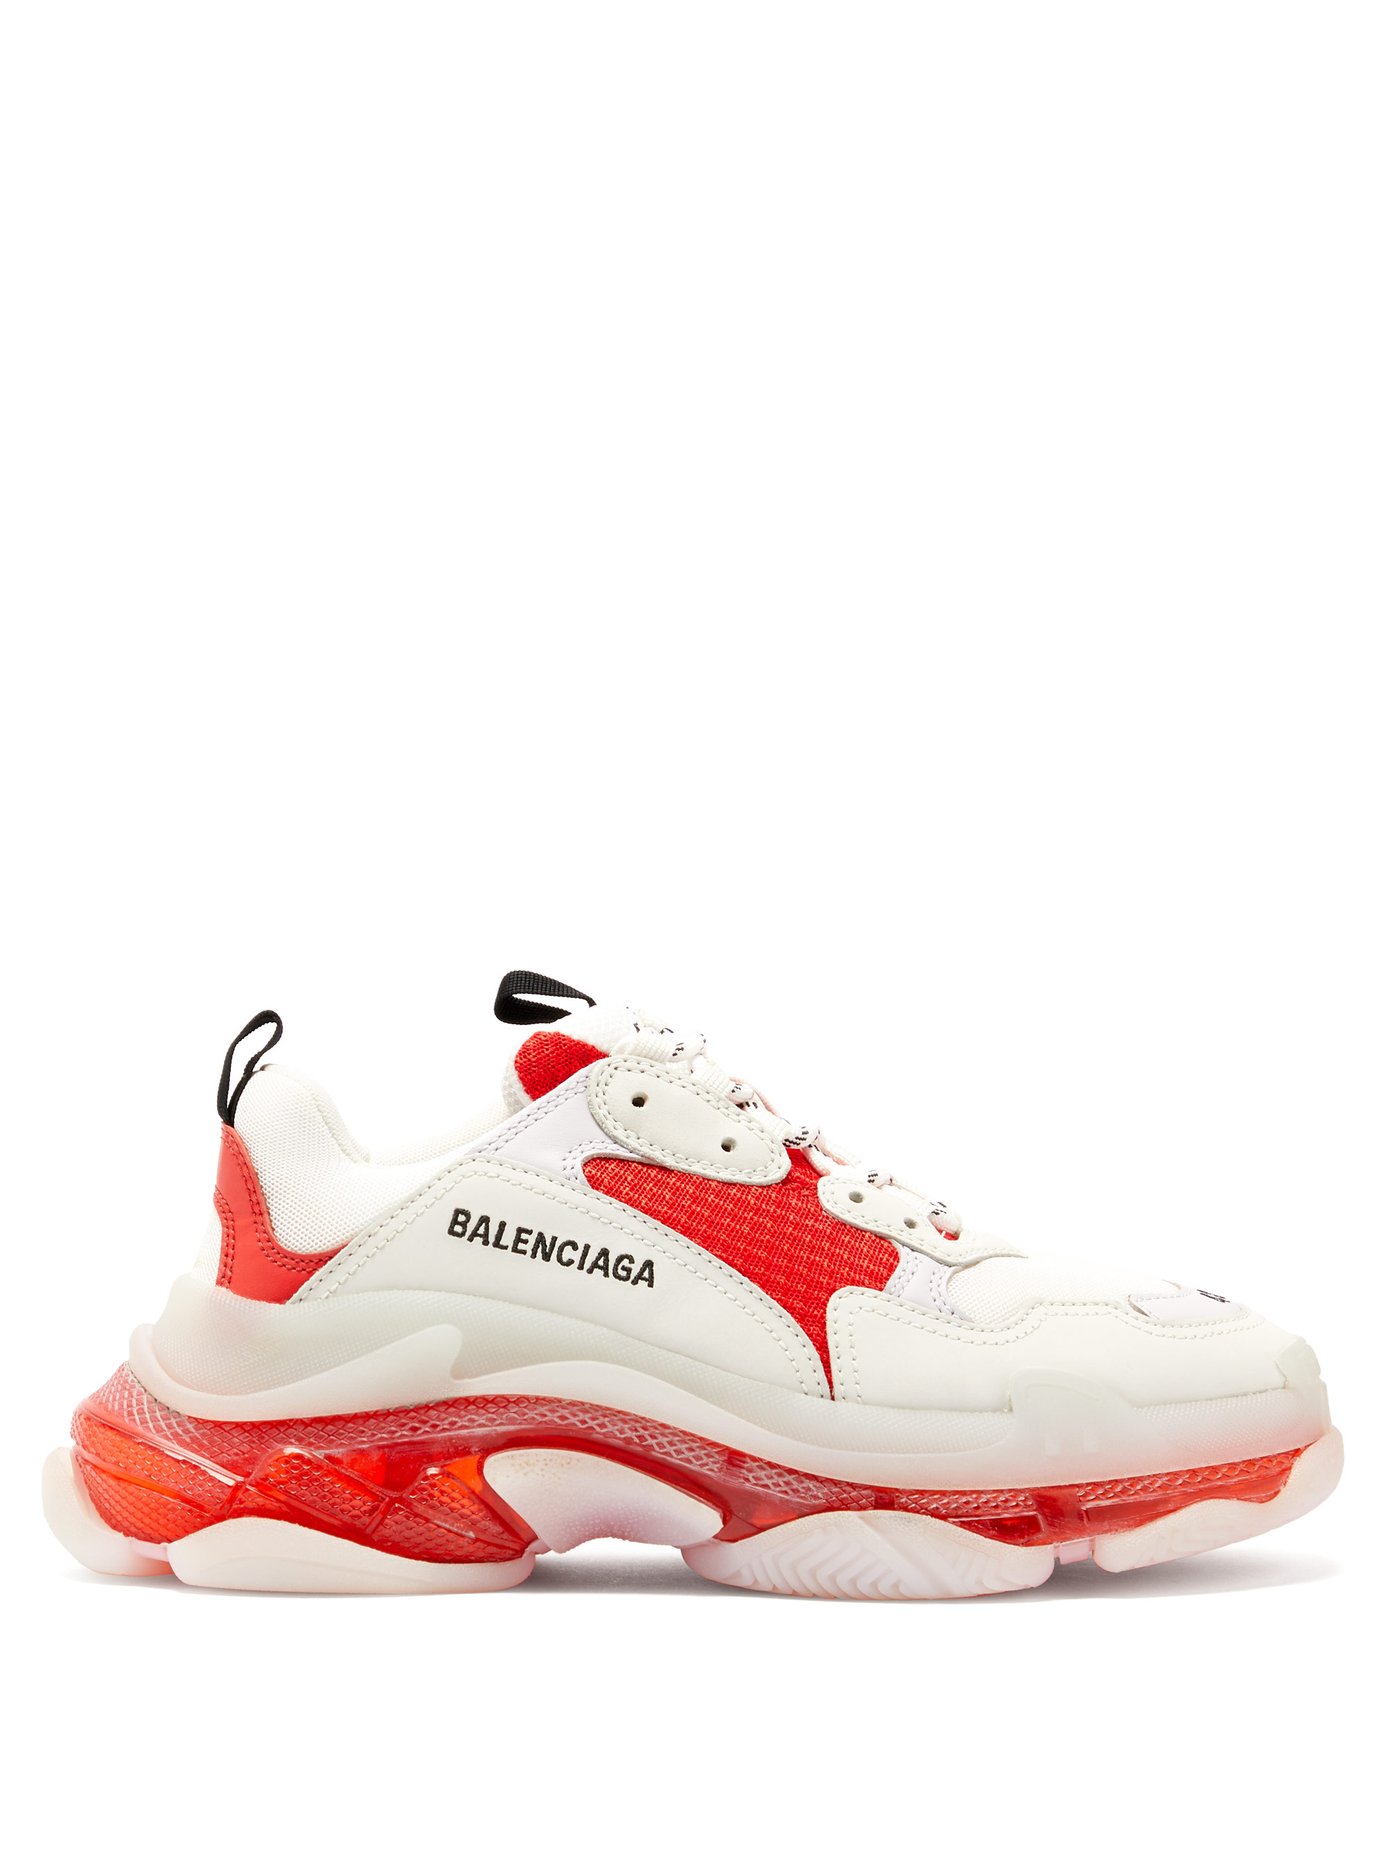 BALENCiAGA Triple S leather and mesh sneakers Pinterest